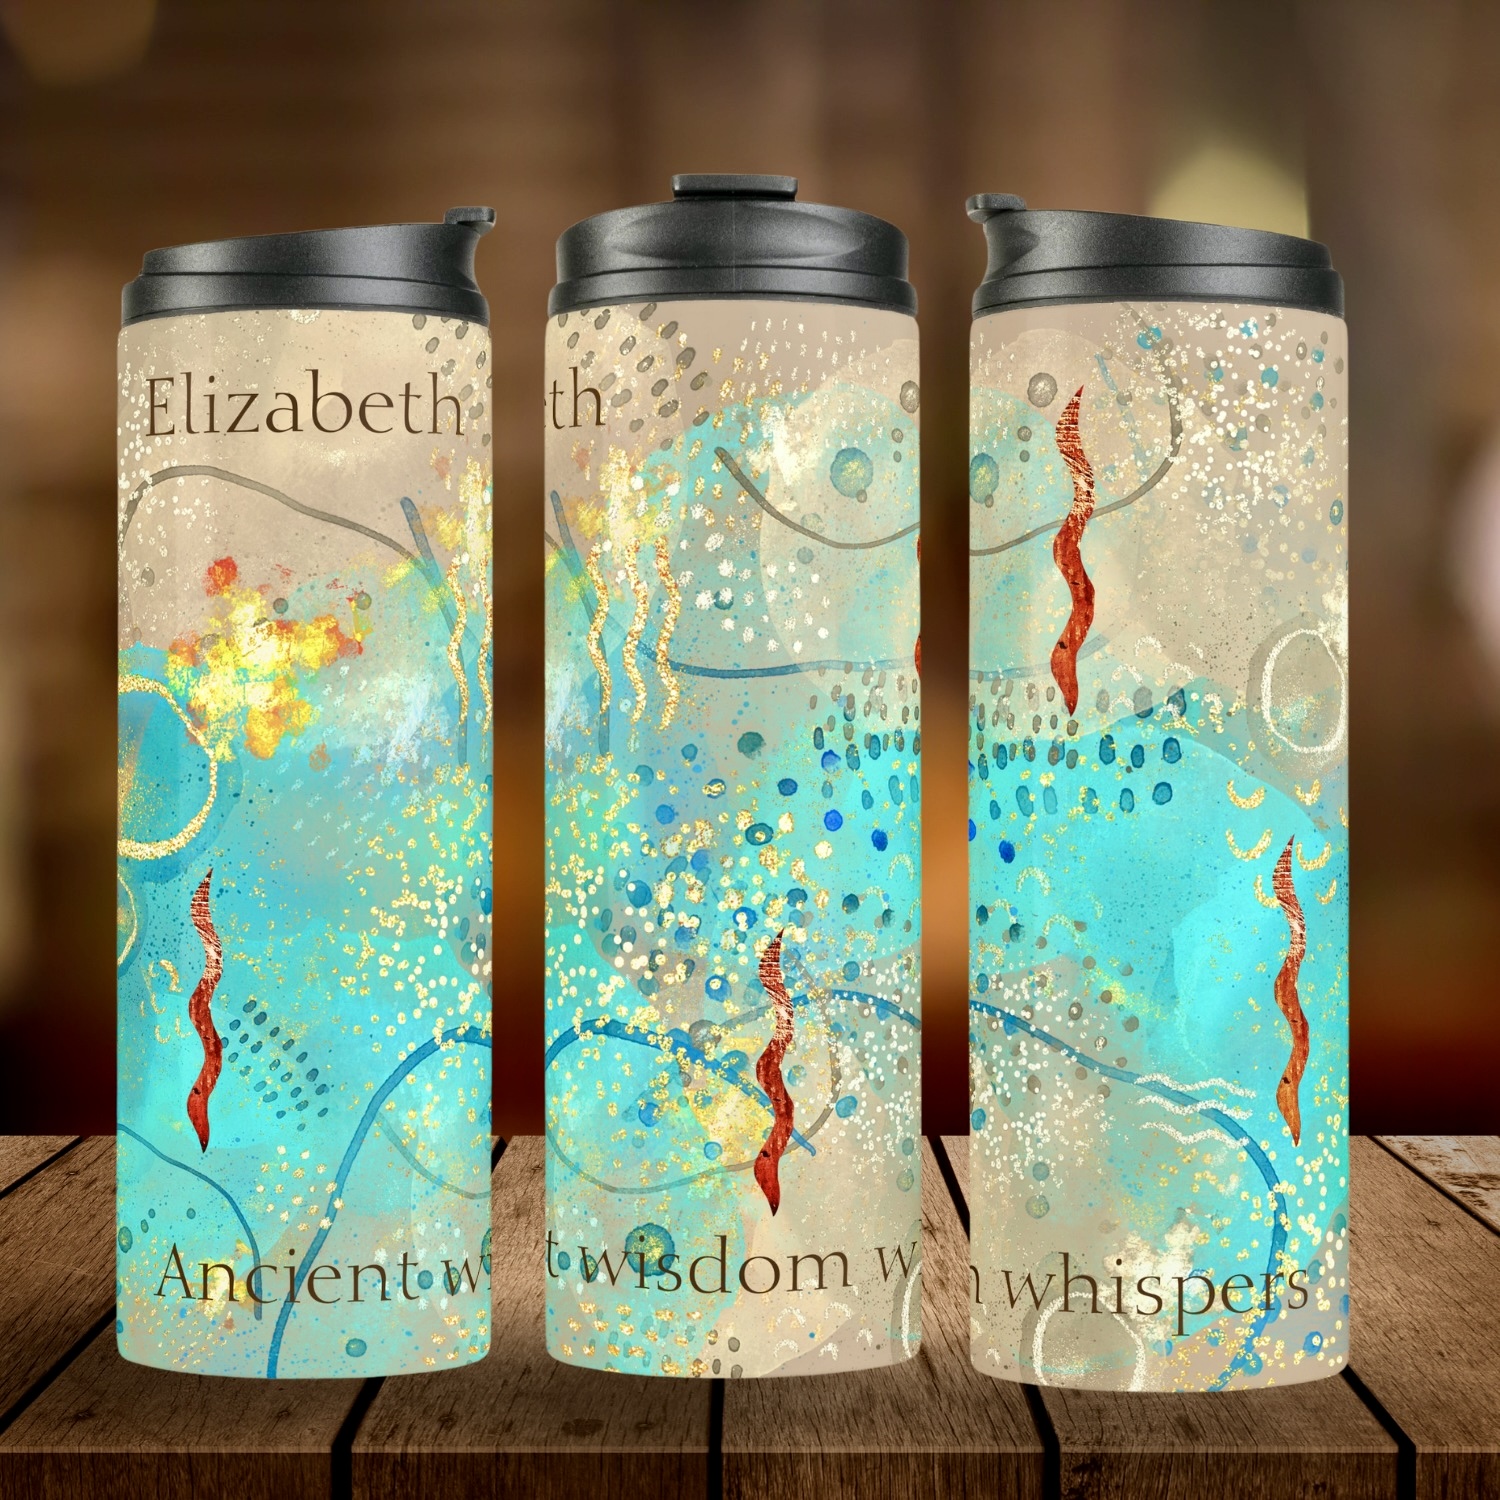 Indigenous-inspired Turquoise And Golden Thermal Tumbler: Keep your beverages hot or cold in timeless elegance.